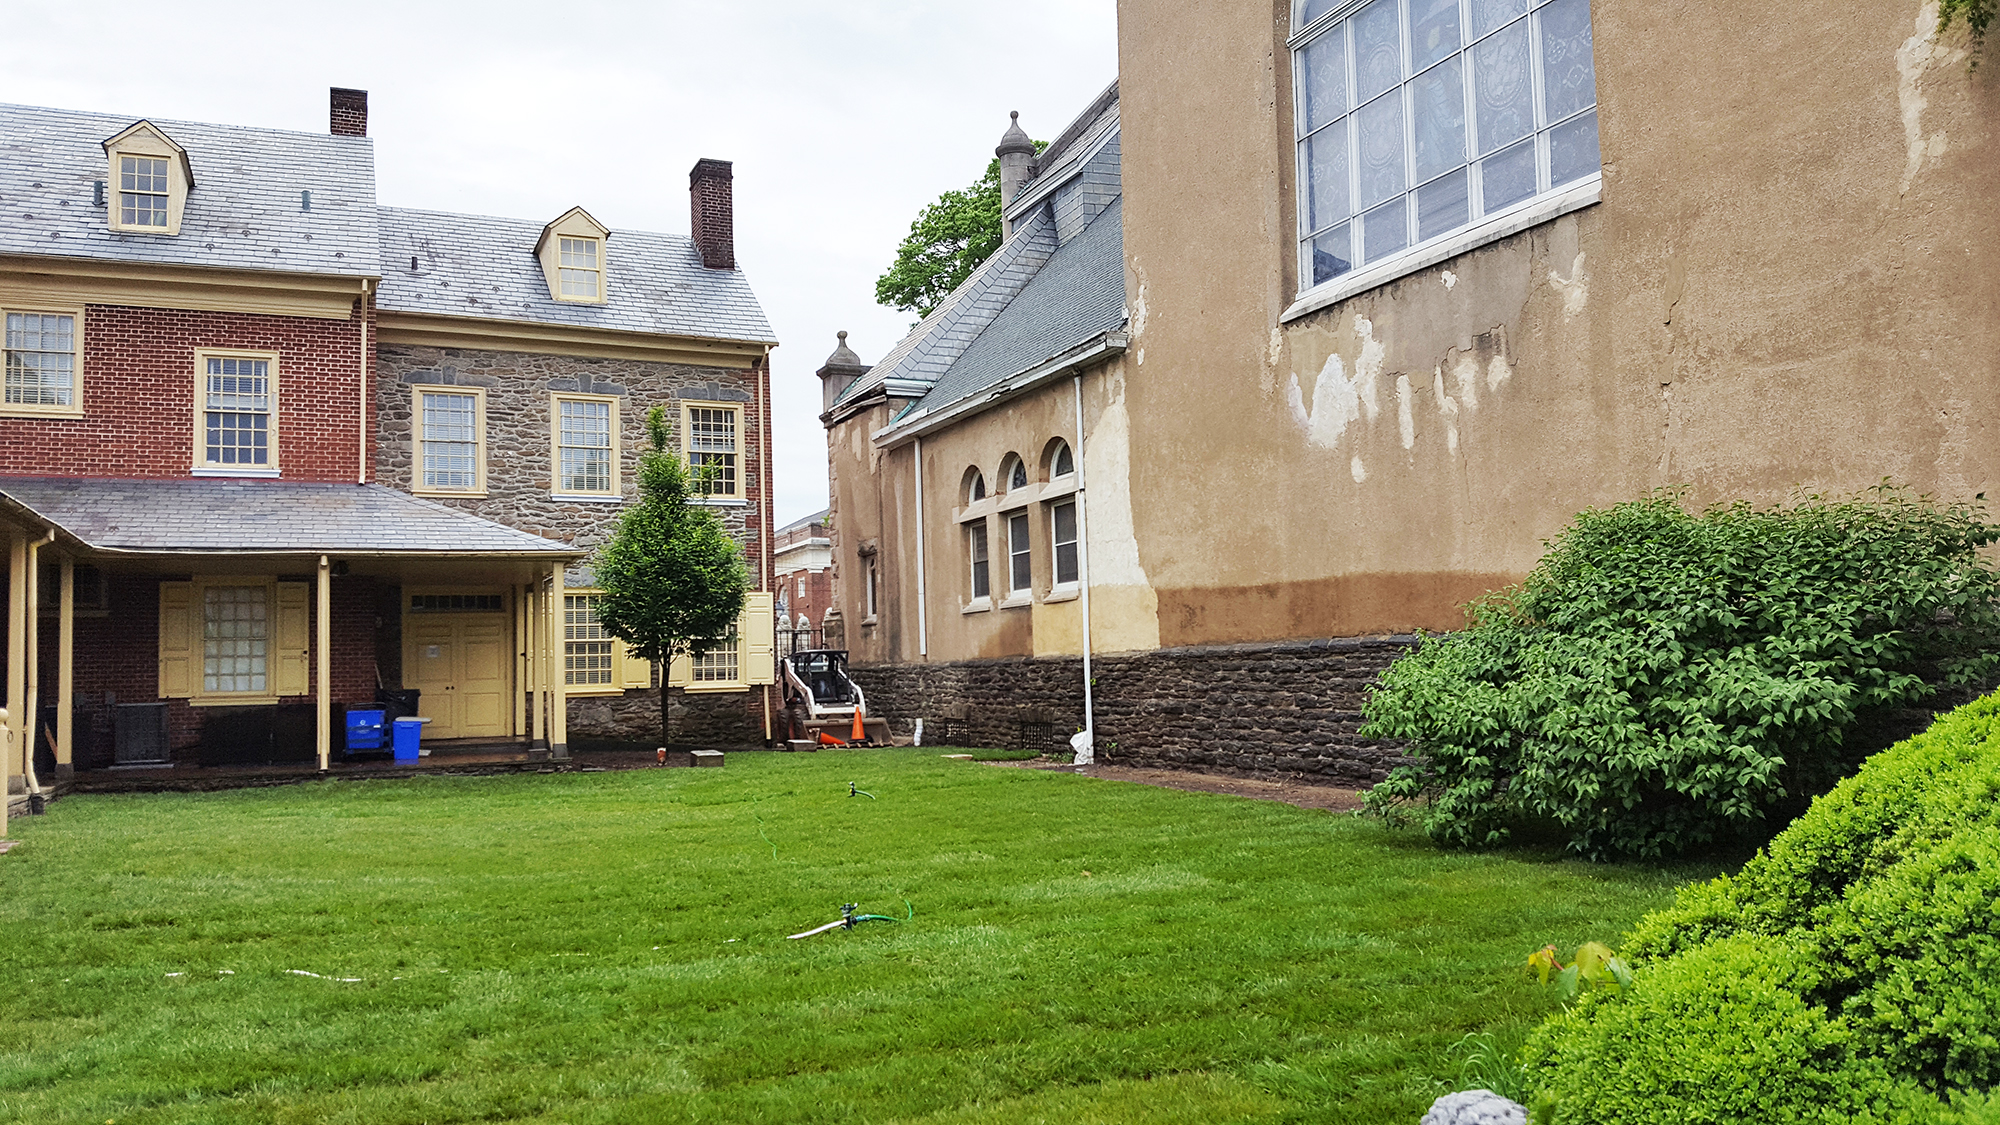 a grassy courtyard surrounded by 18th century buildings